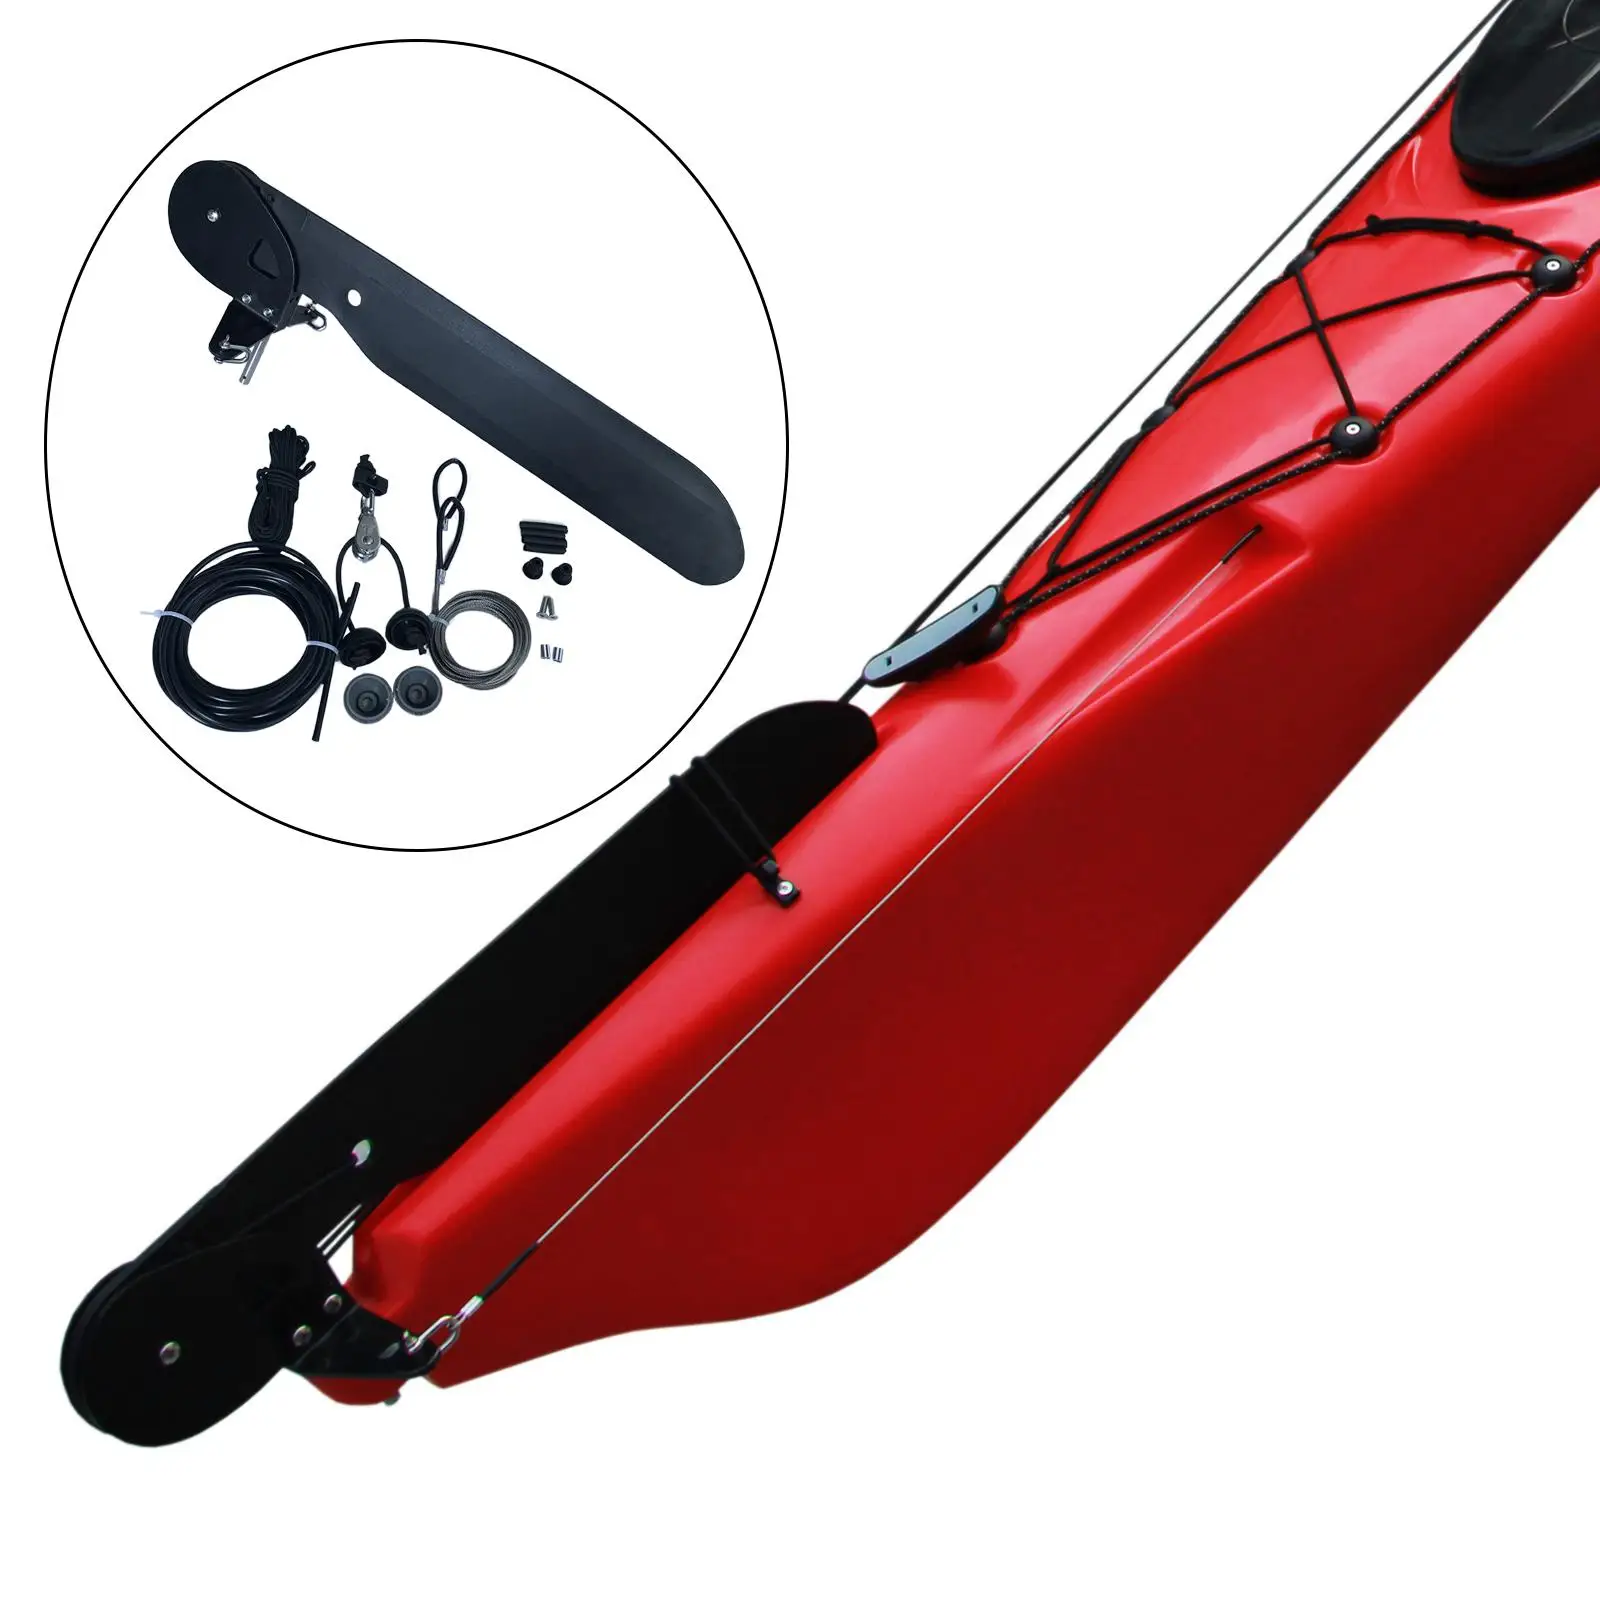 Kayak Boat Rudder Foot Control Direction Adjustable for Canoe Tail Accessroy